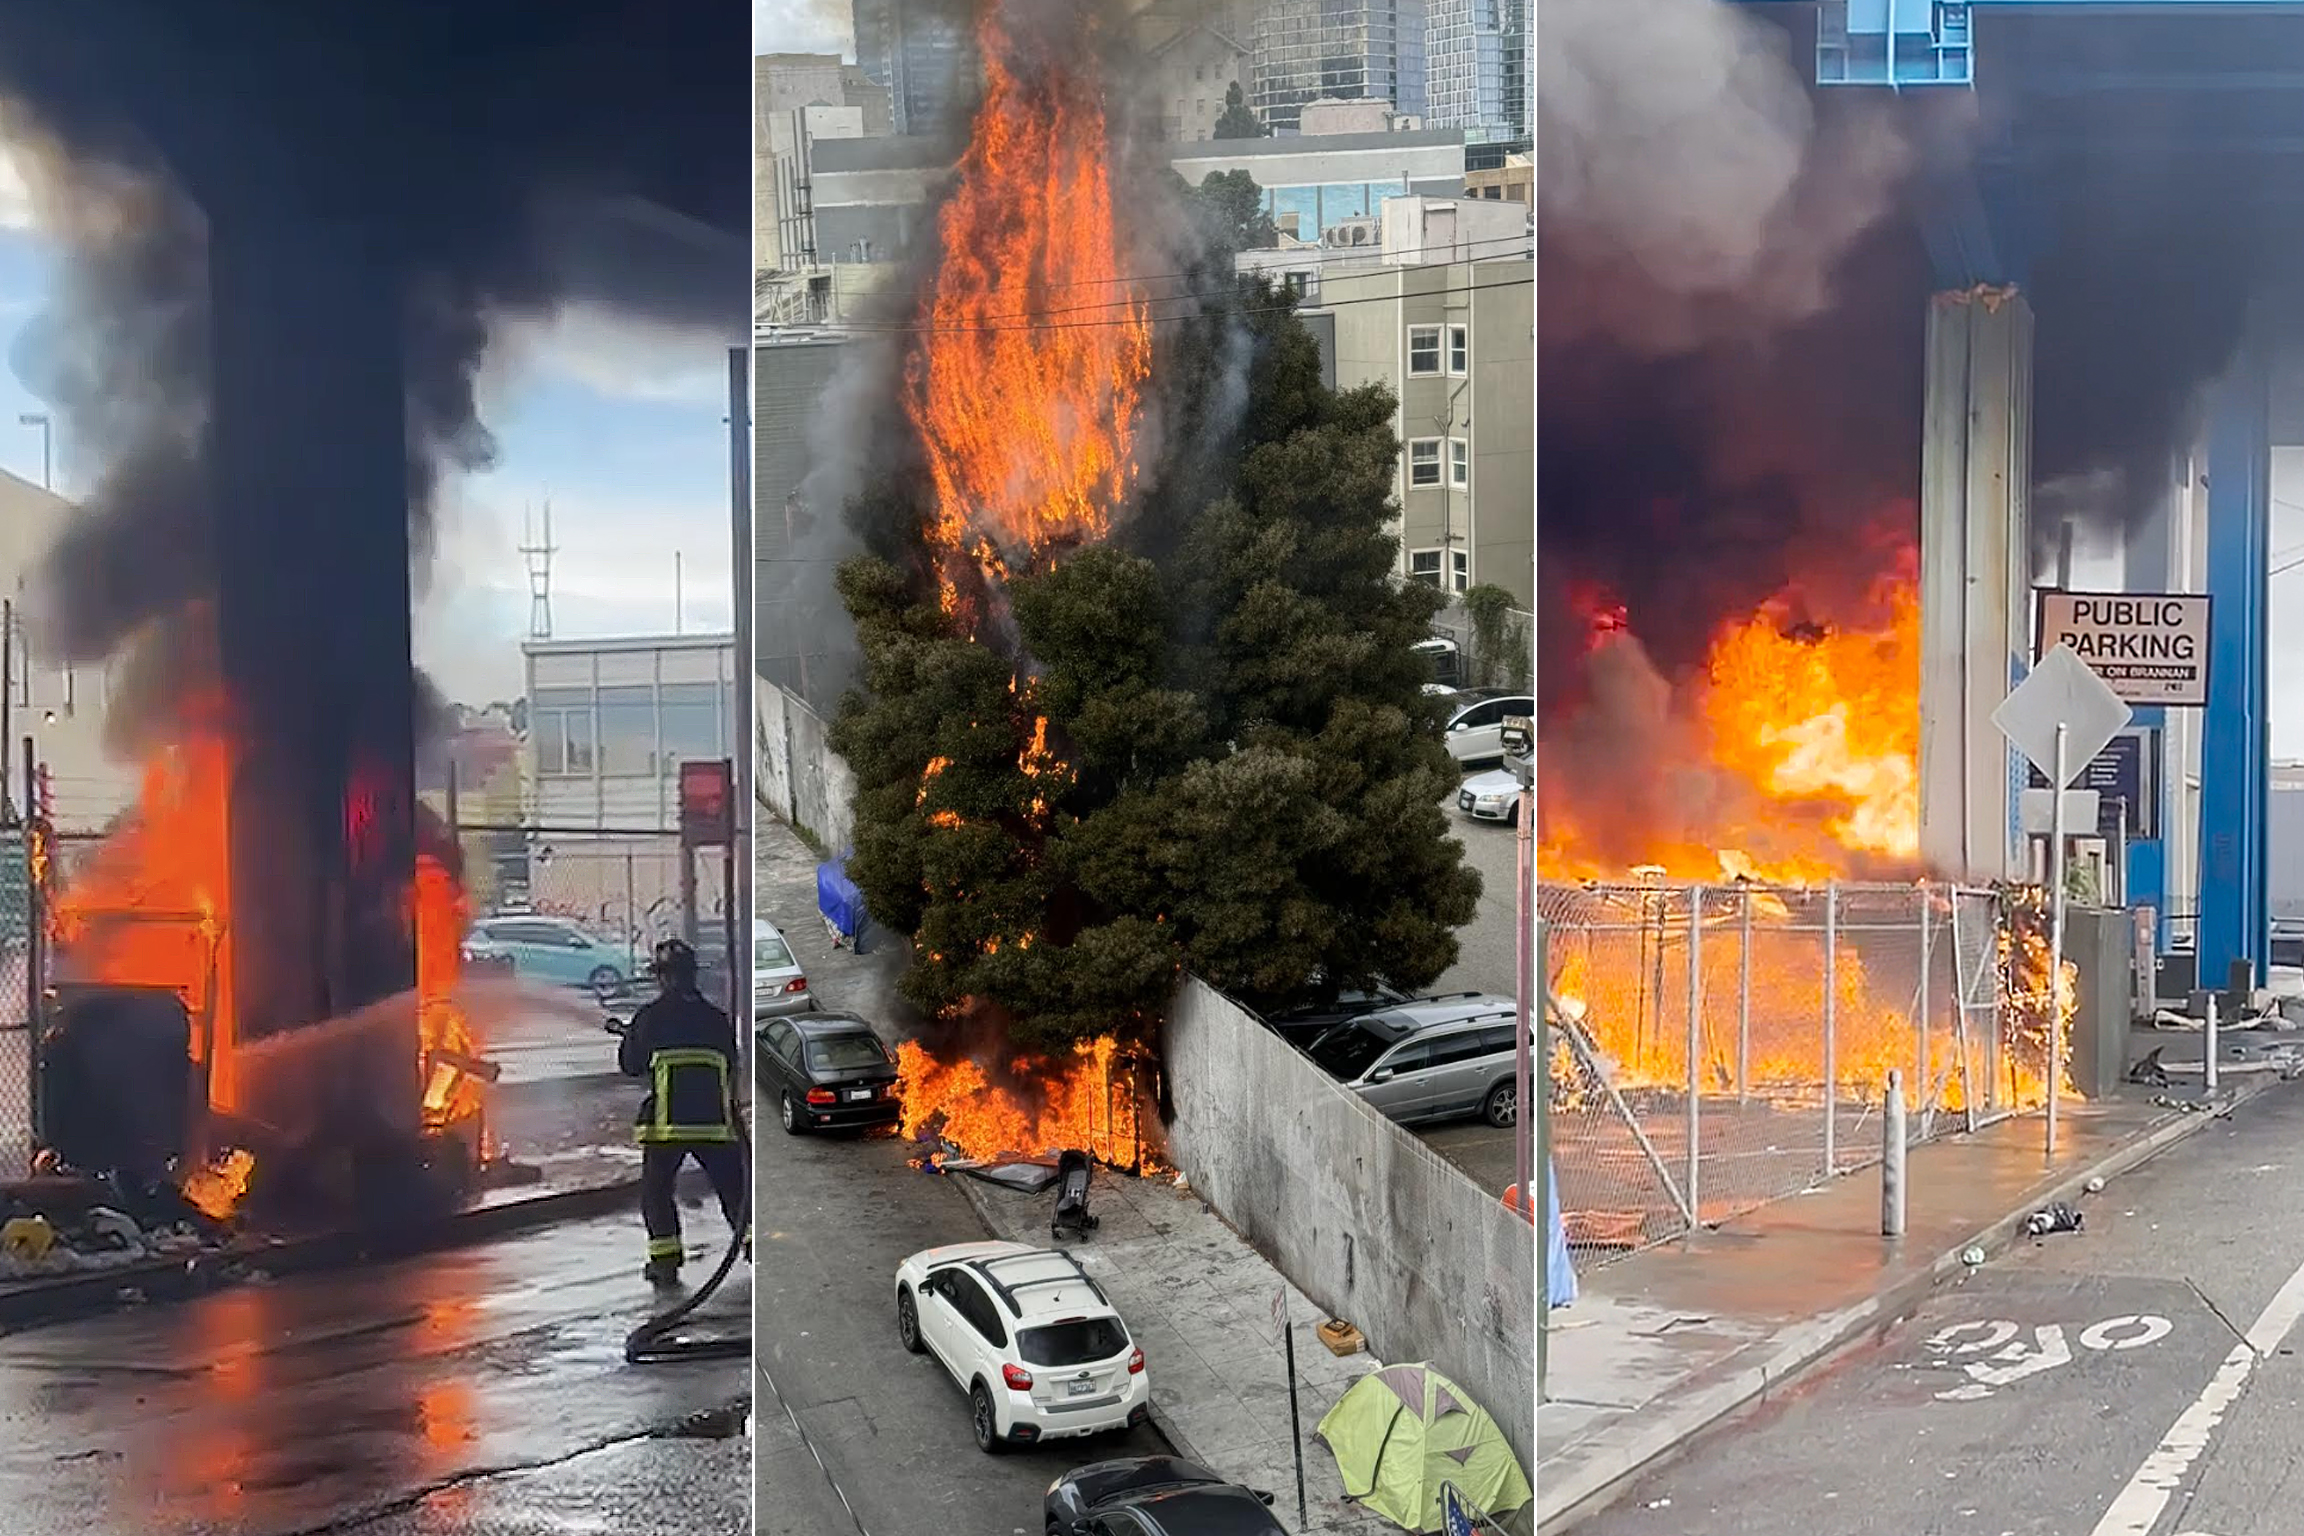 A triptych of images showing a large urban fire escalating. Flames engulf structures and trees near a parking sign.